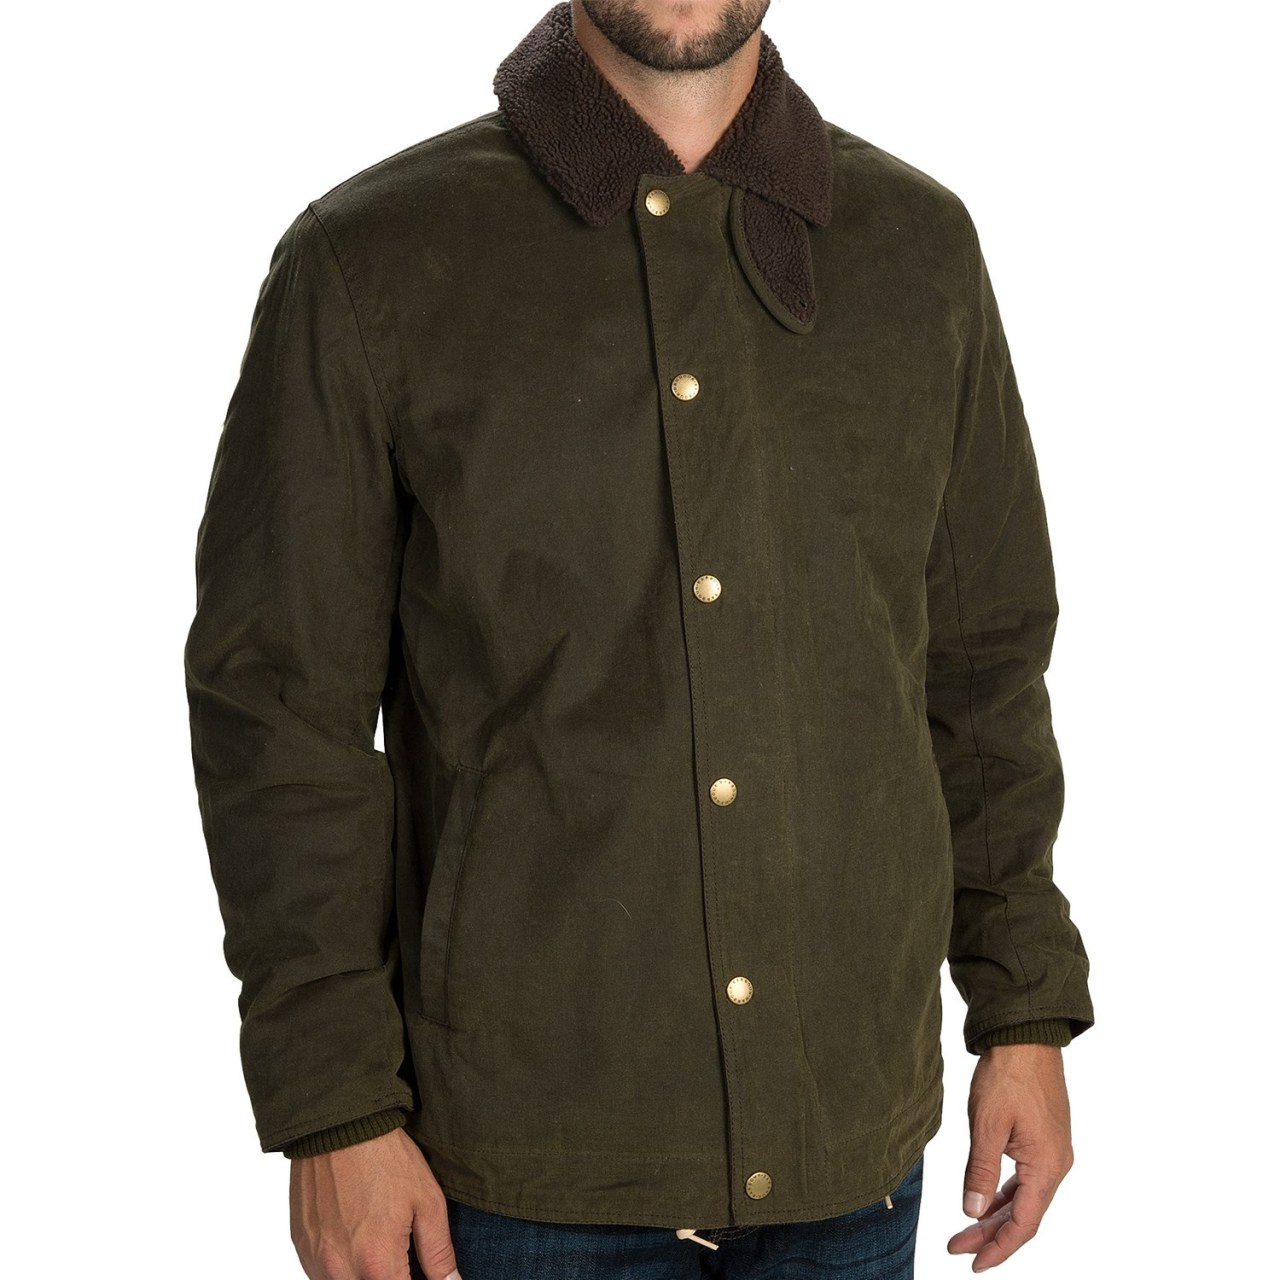 It’s On Sale: Barbour Jackets – Put This On